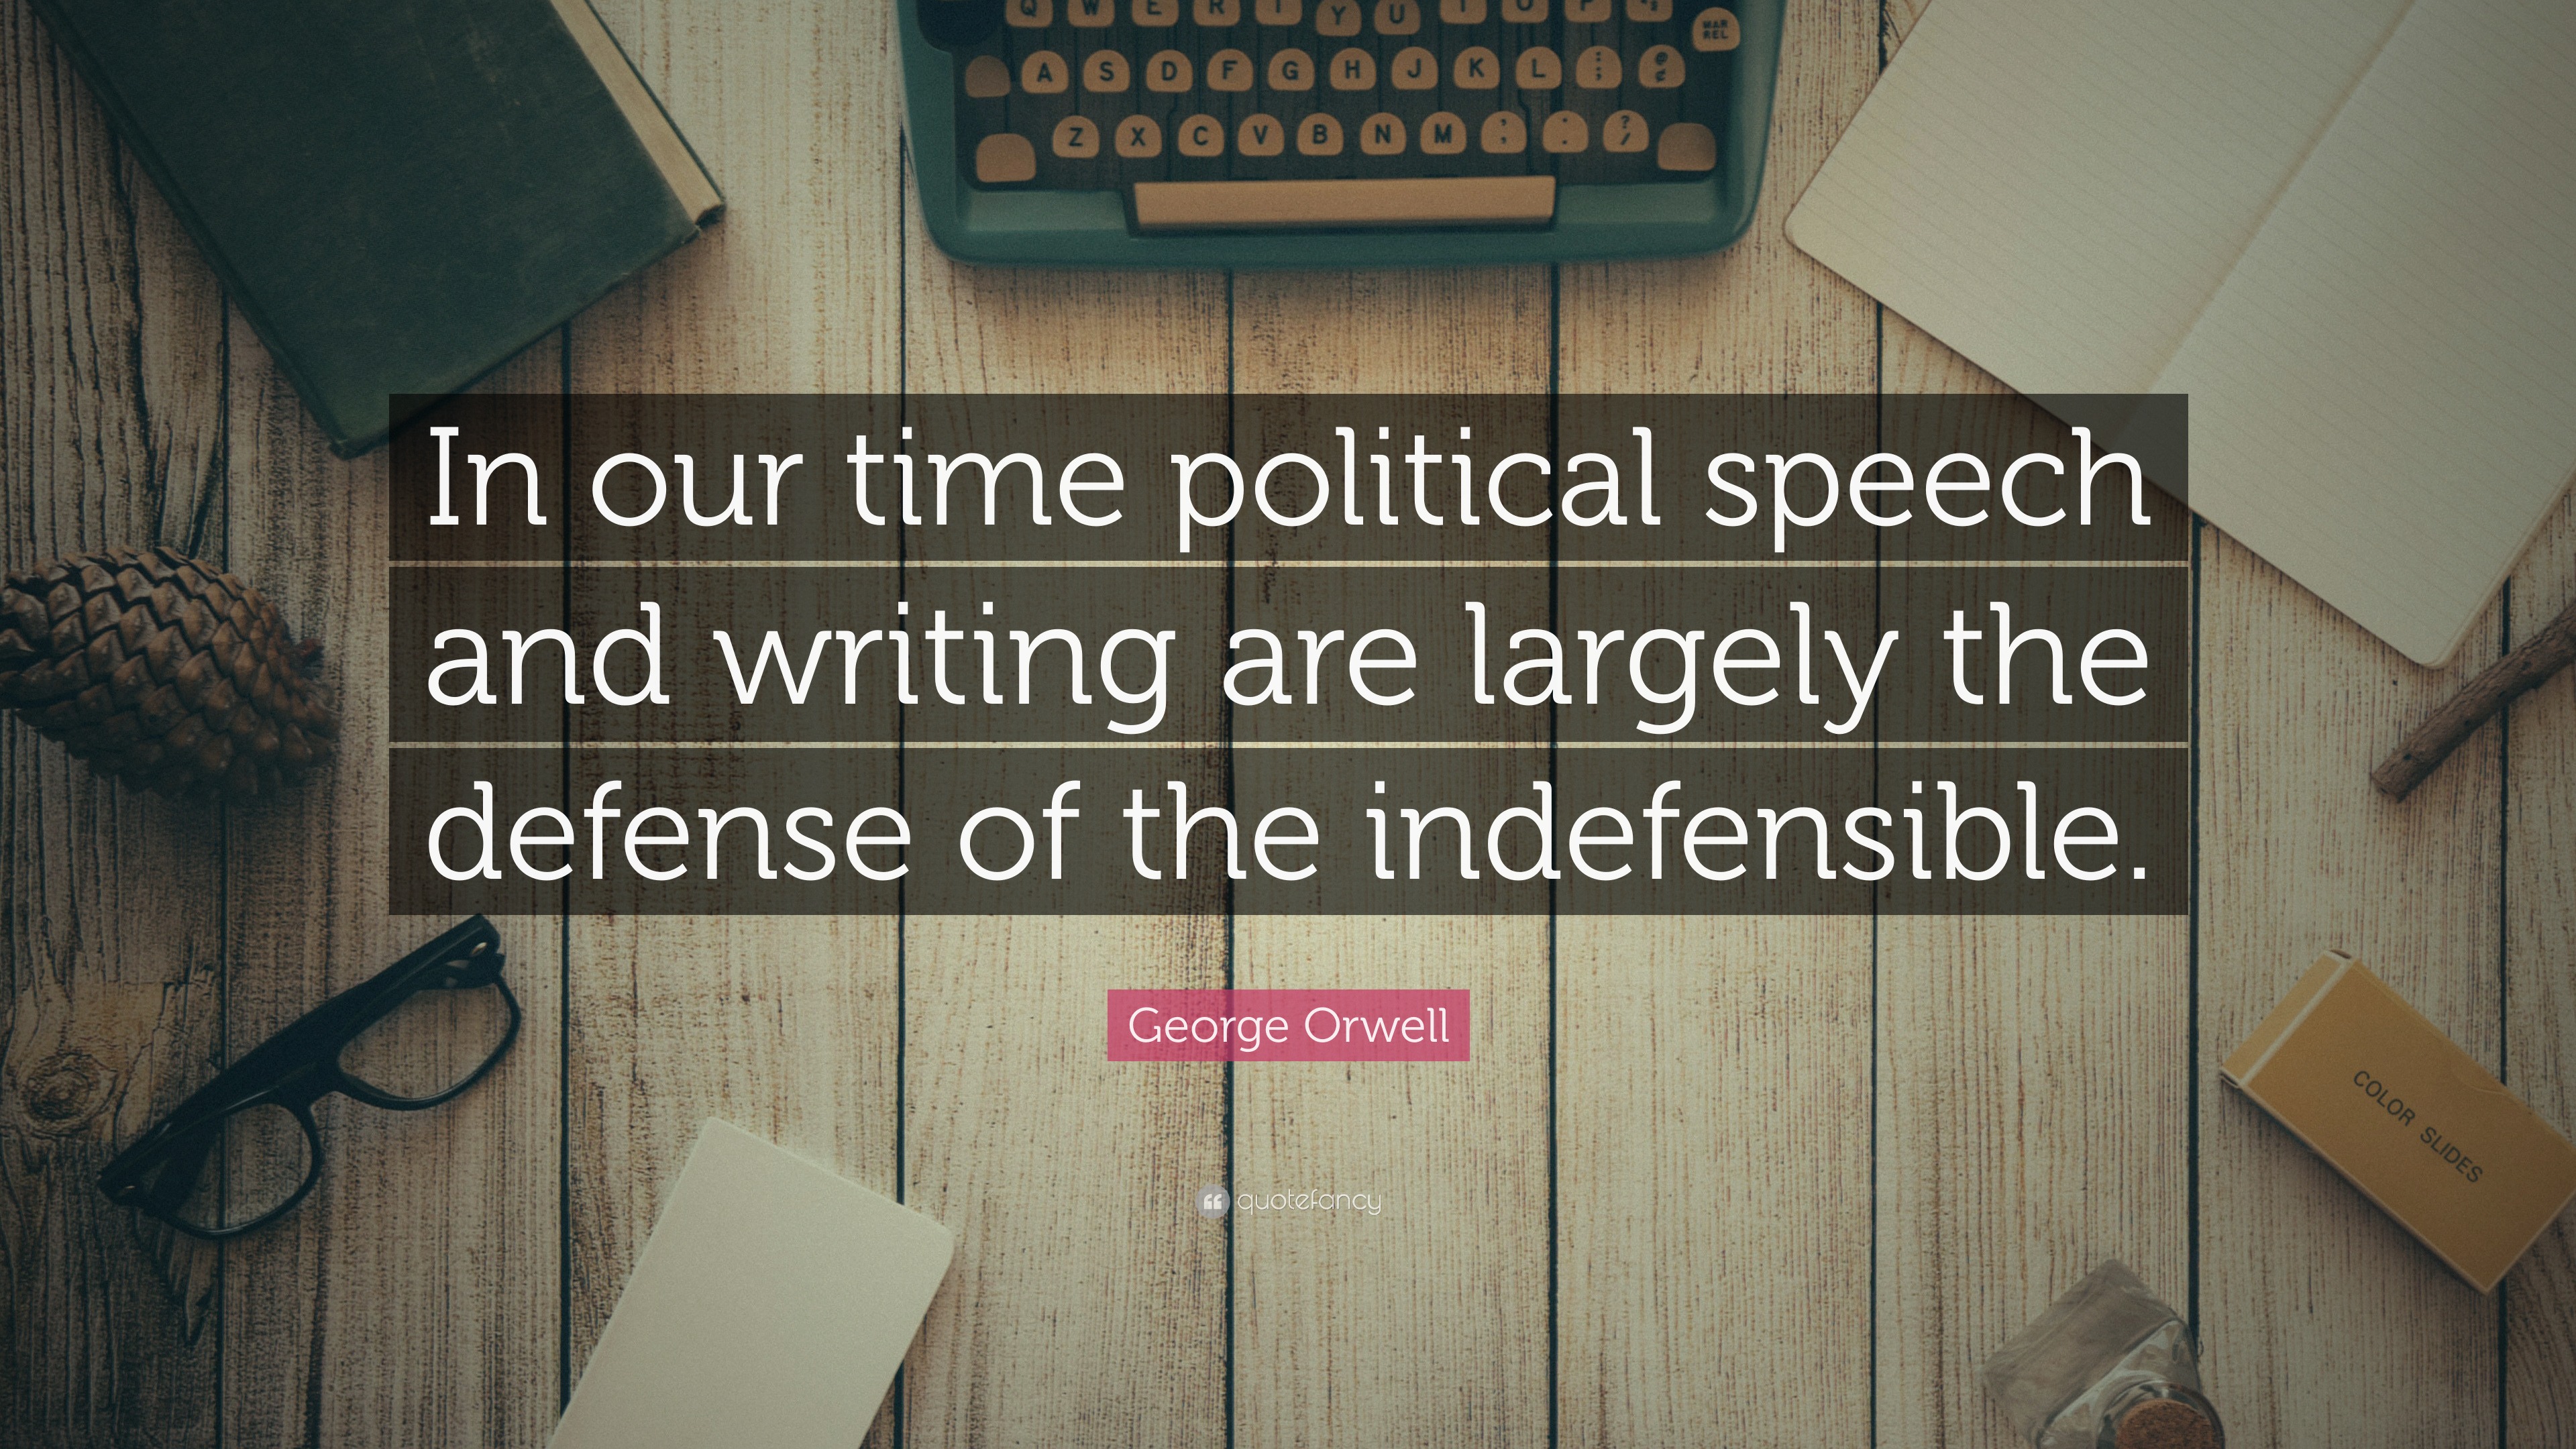 in our time political speech and writing are largely